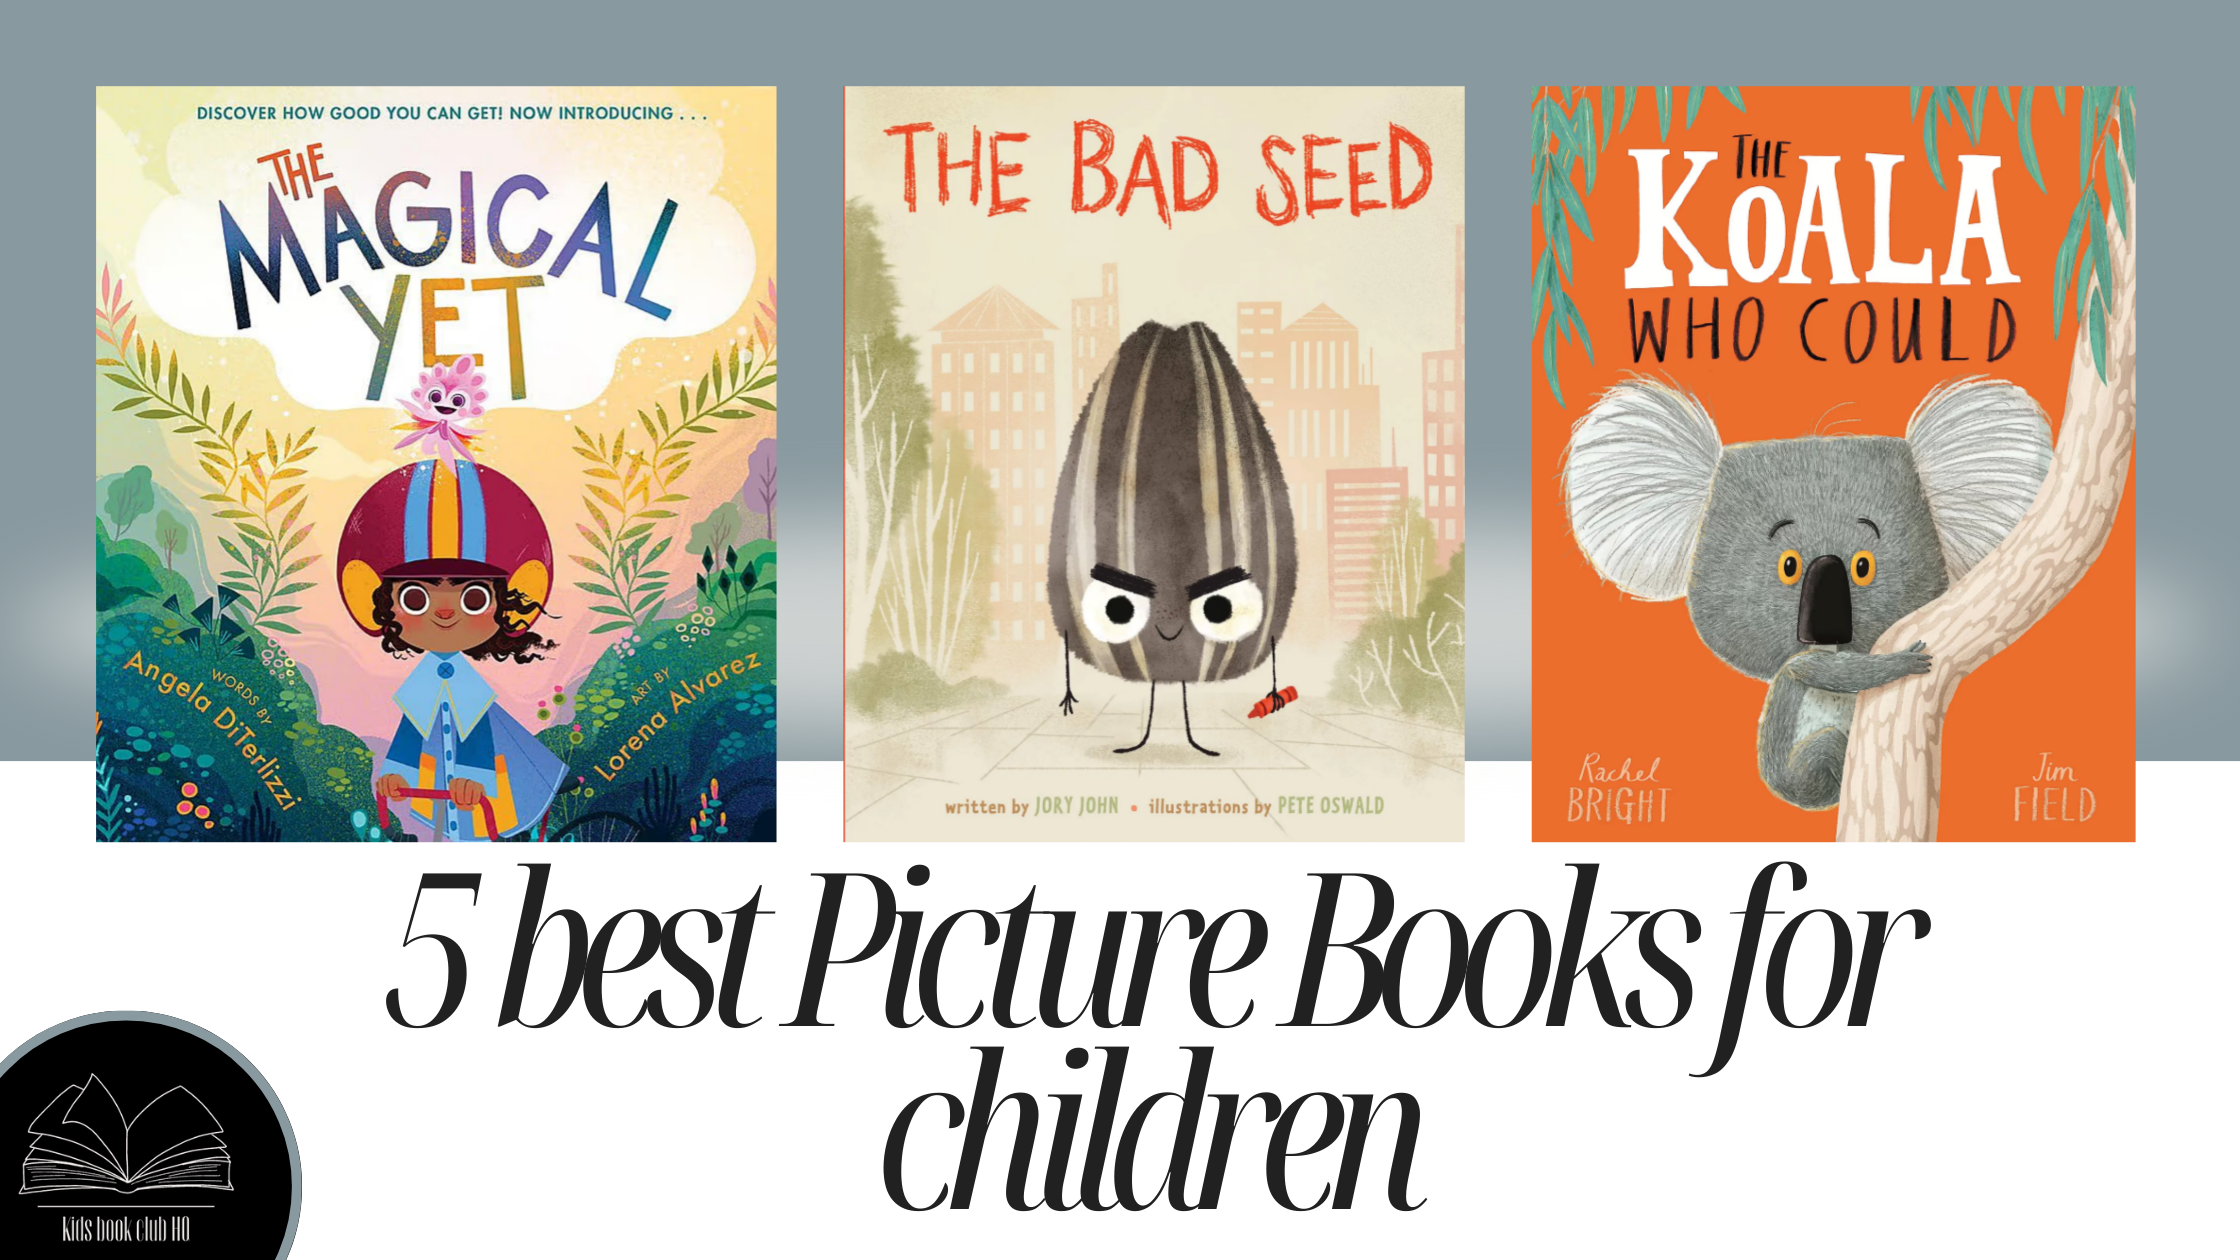 5 best Picture Books for children click now to read!!